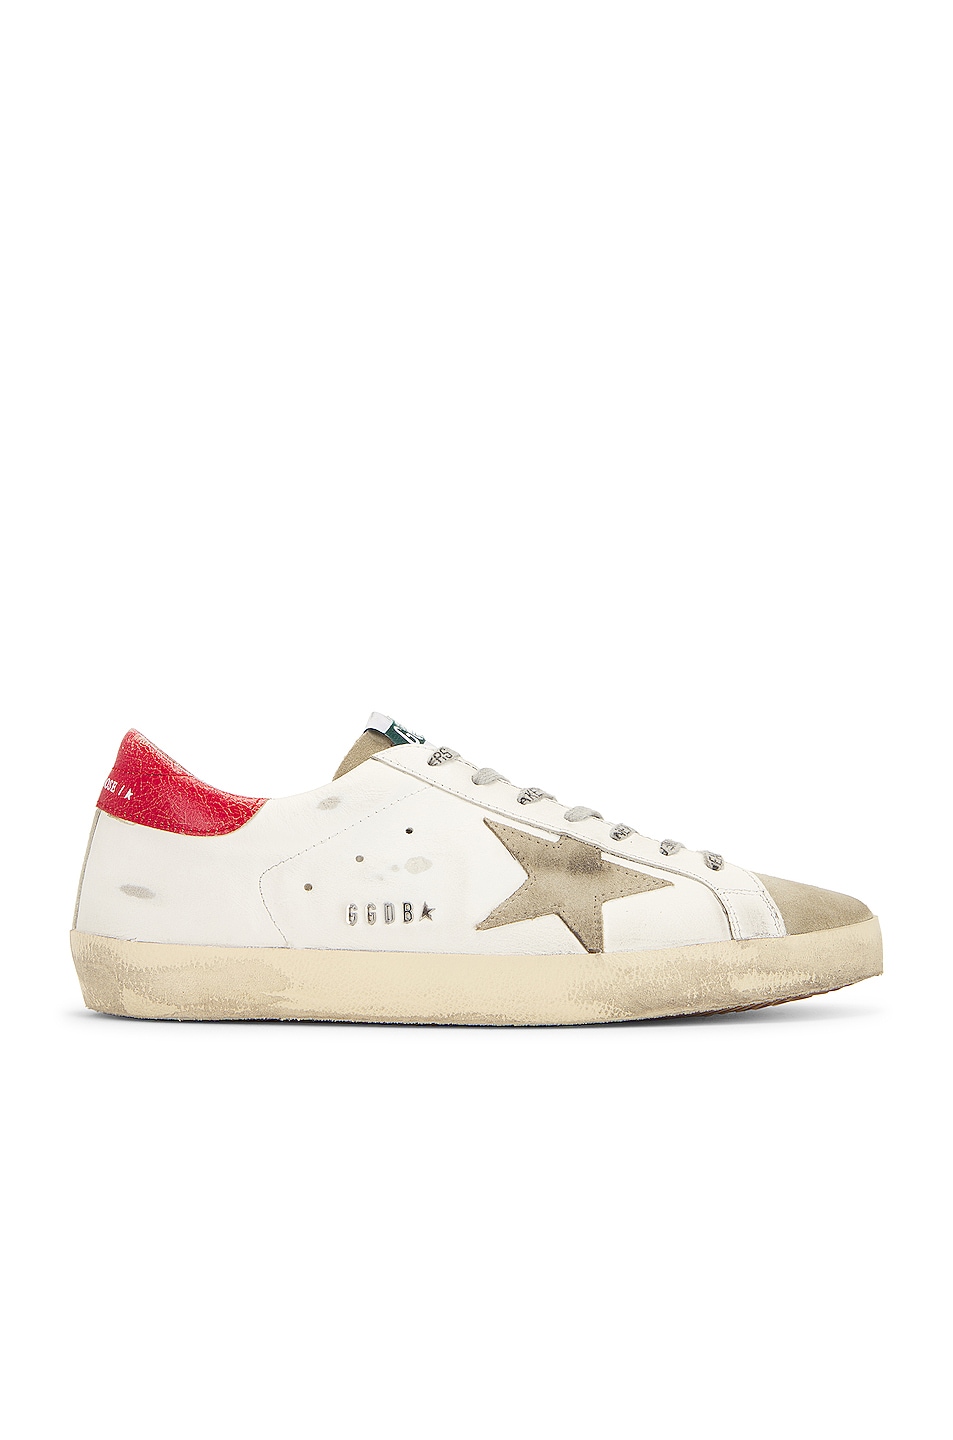 Image 1 of Golden Goose Superstar Sneaker in White, Taupe & Red